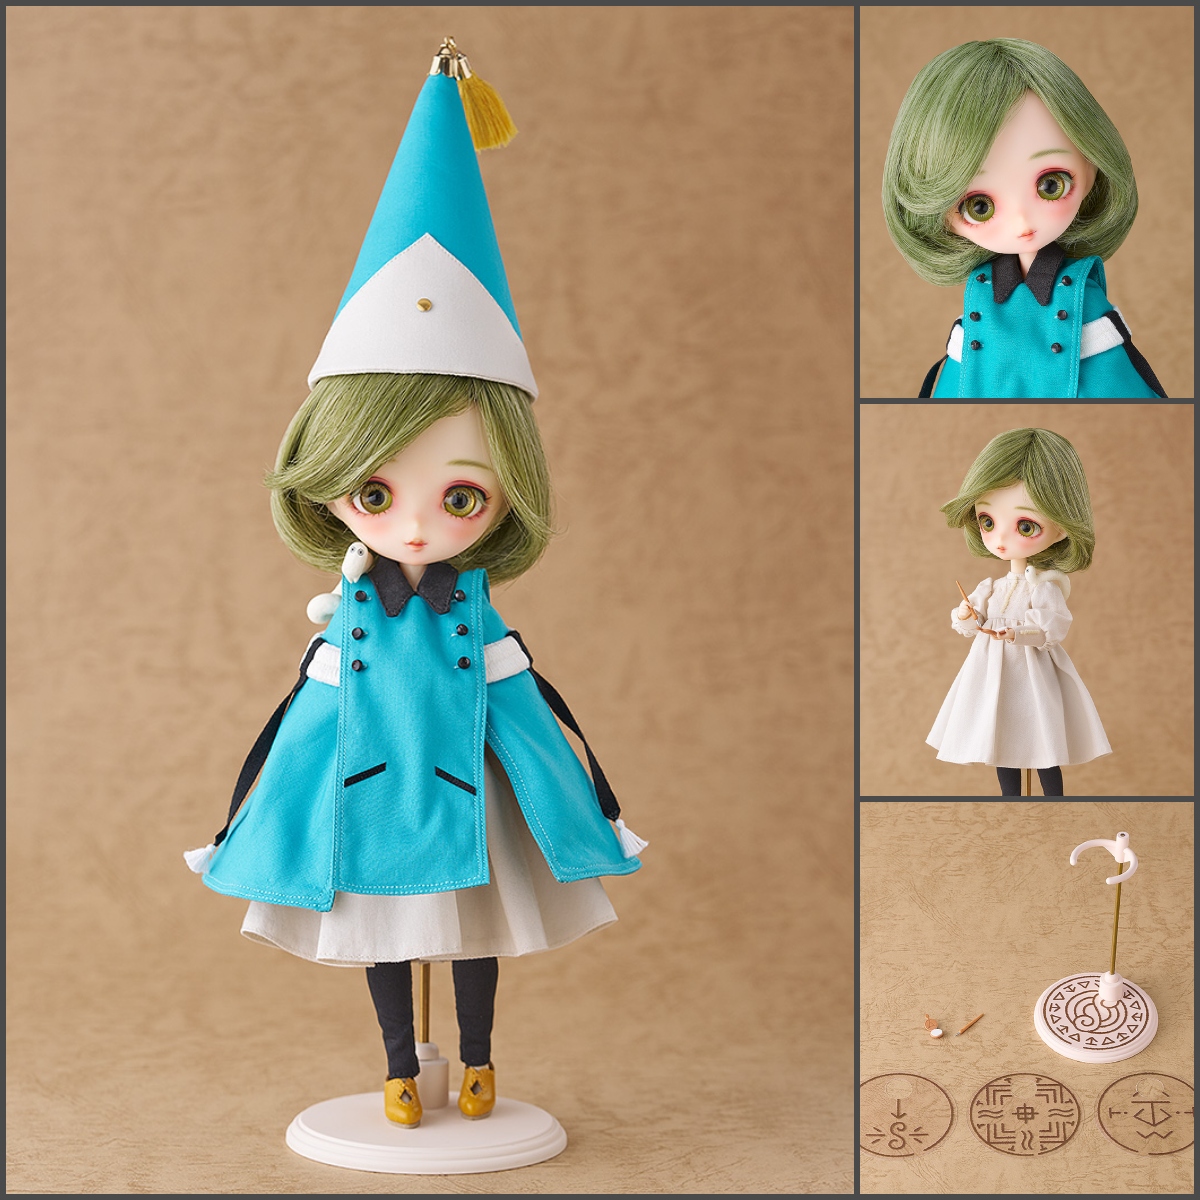 Introducing Harmonia bloom doll Coco, from the popular series 'Witch Hat Atelier'. Don't miss out on the GSC Exclusive Bonus Shikishi Illustration Reproduction by Kamome Shirahama. Preorder today! Shop: s.goodsmile.link/i5T #WitchHatAtelier #Harmoniabloom #Goodsmile